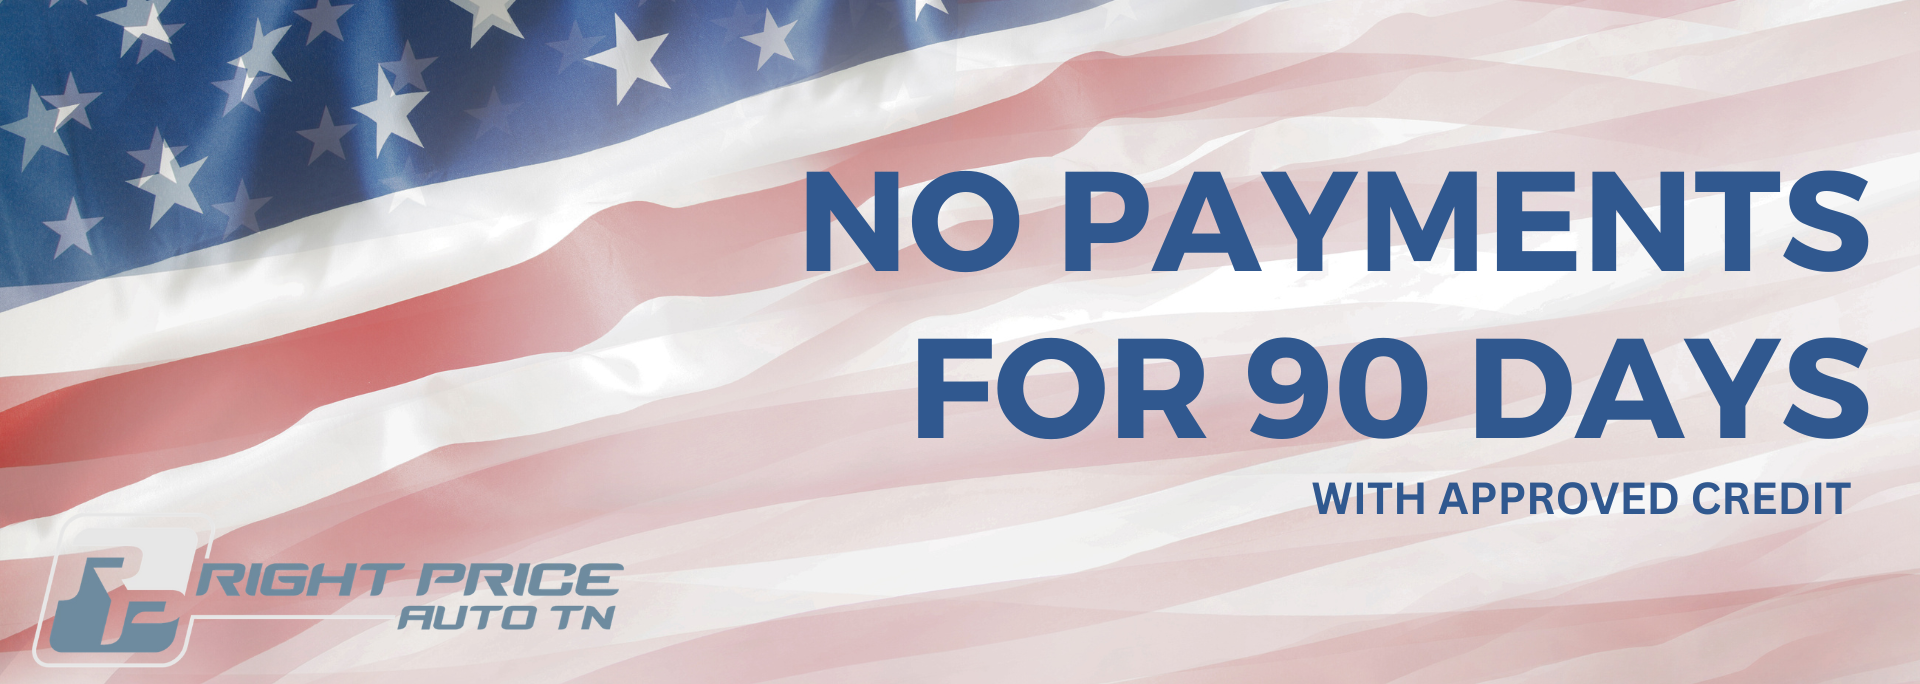 No Payments For 90 Days Banner